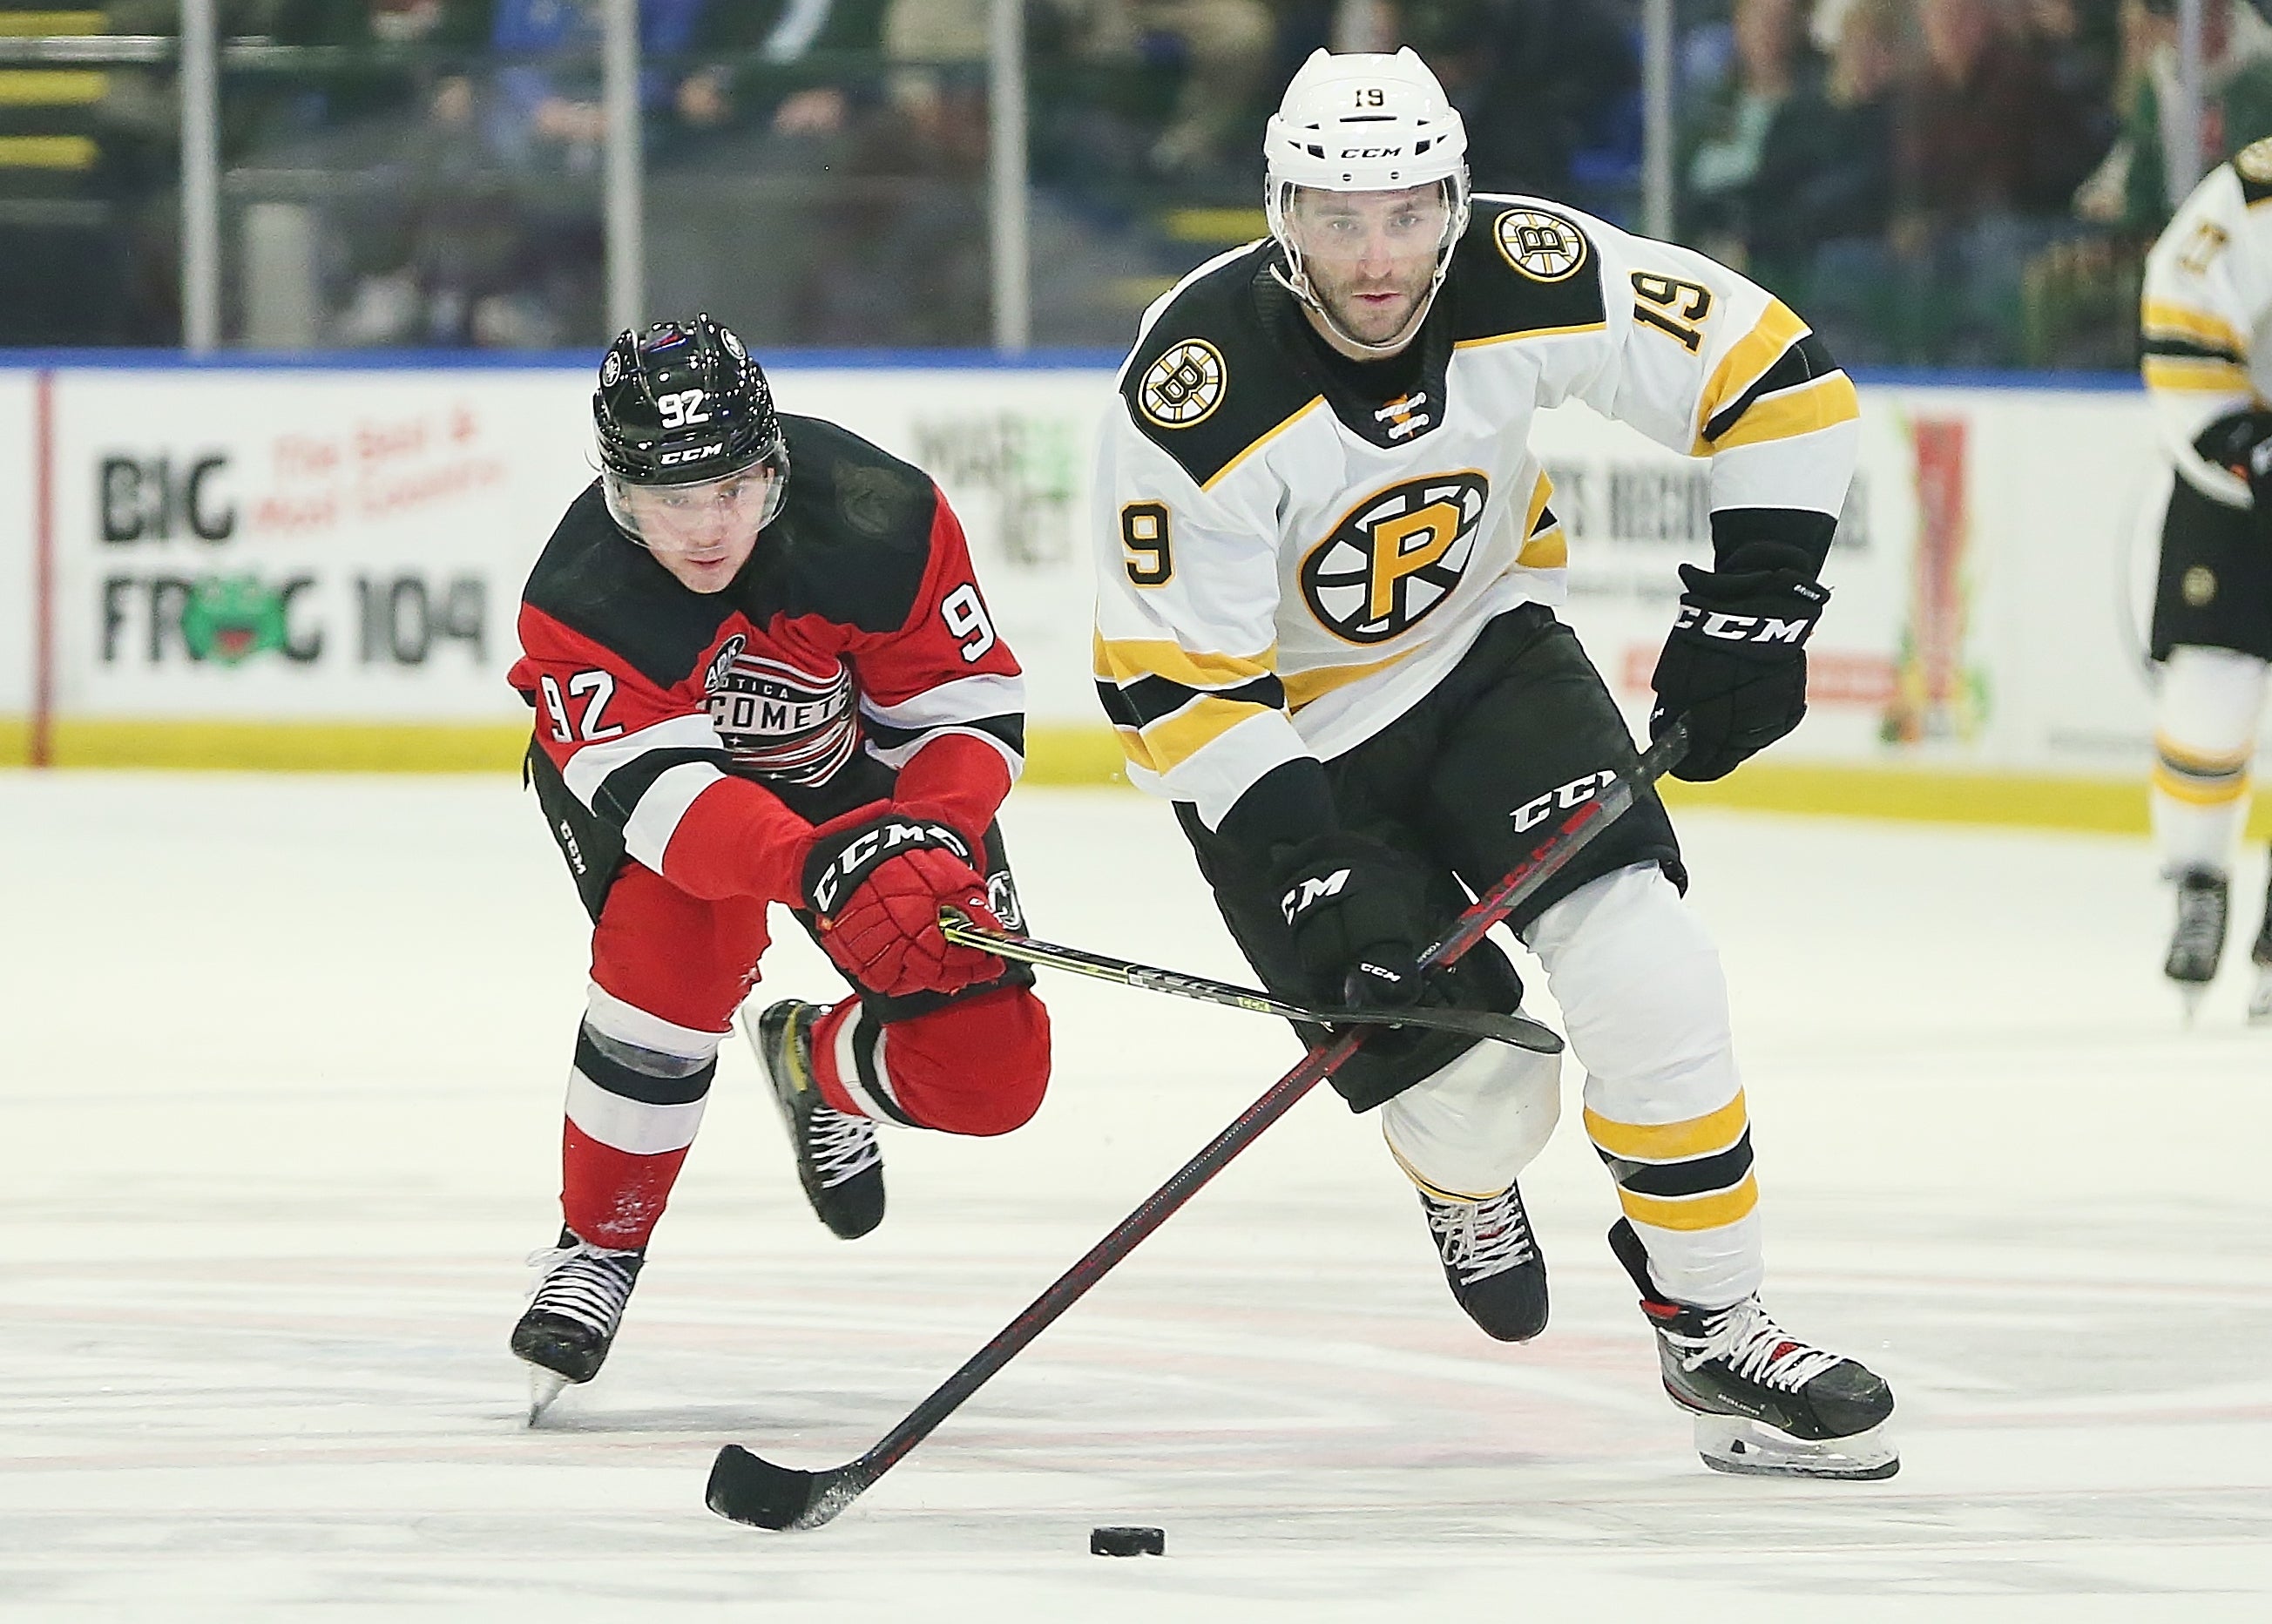 P-BRUINS BACK IN THE WIN COLUMN WITH 6-2 VICTORY OVER UTICA COMETS